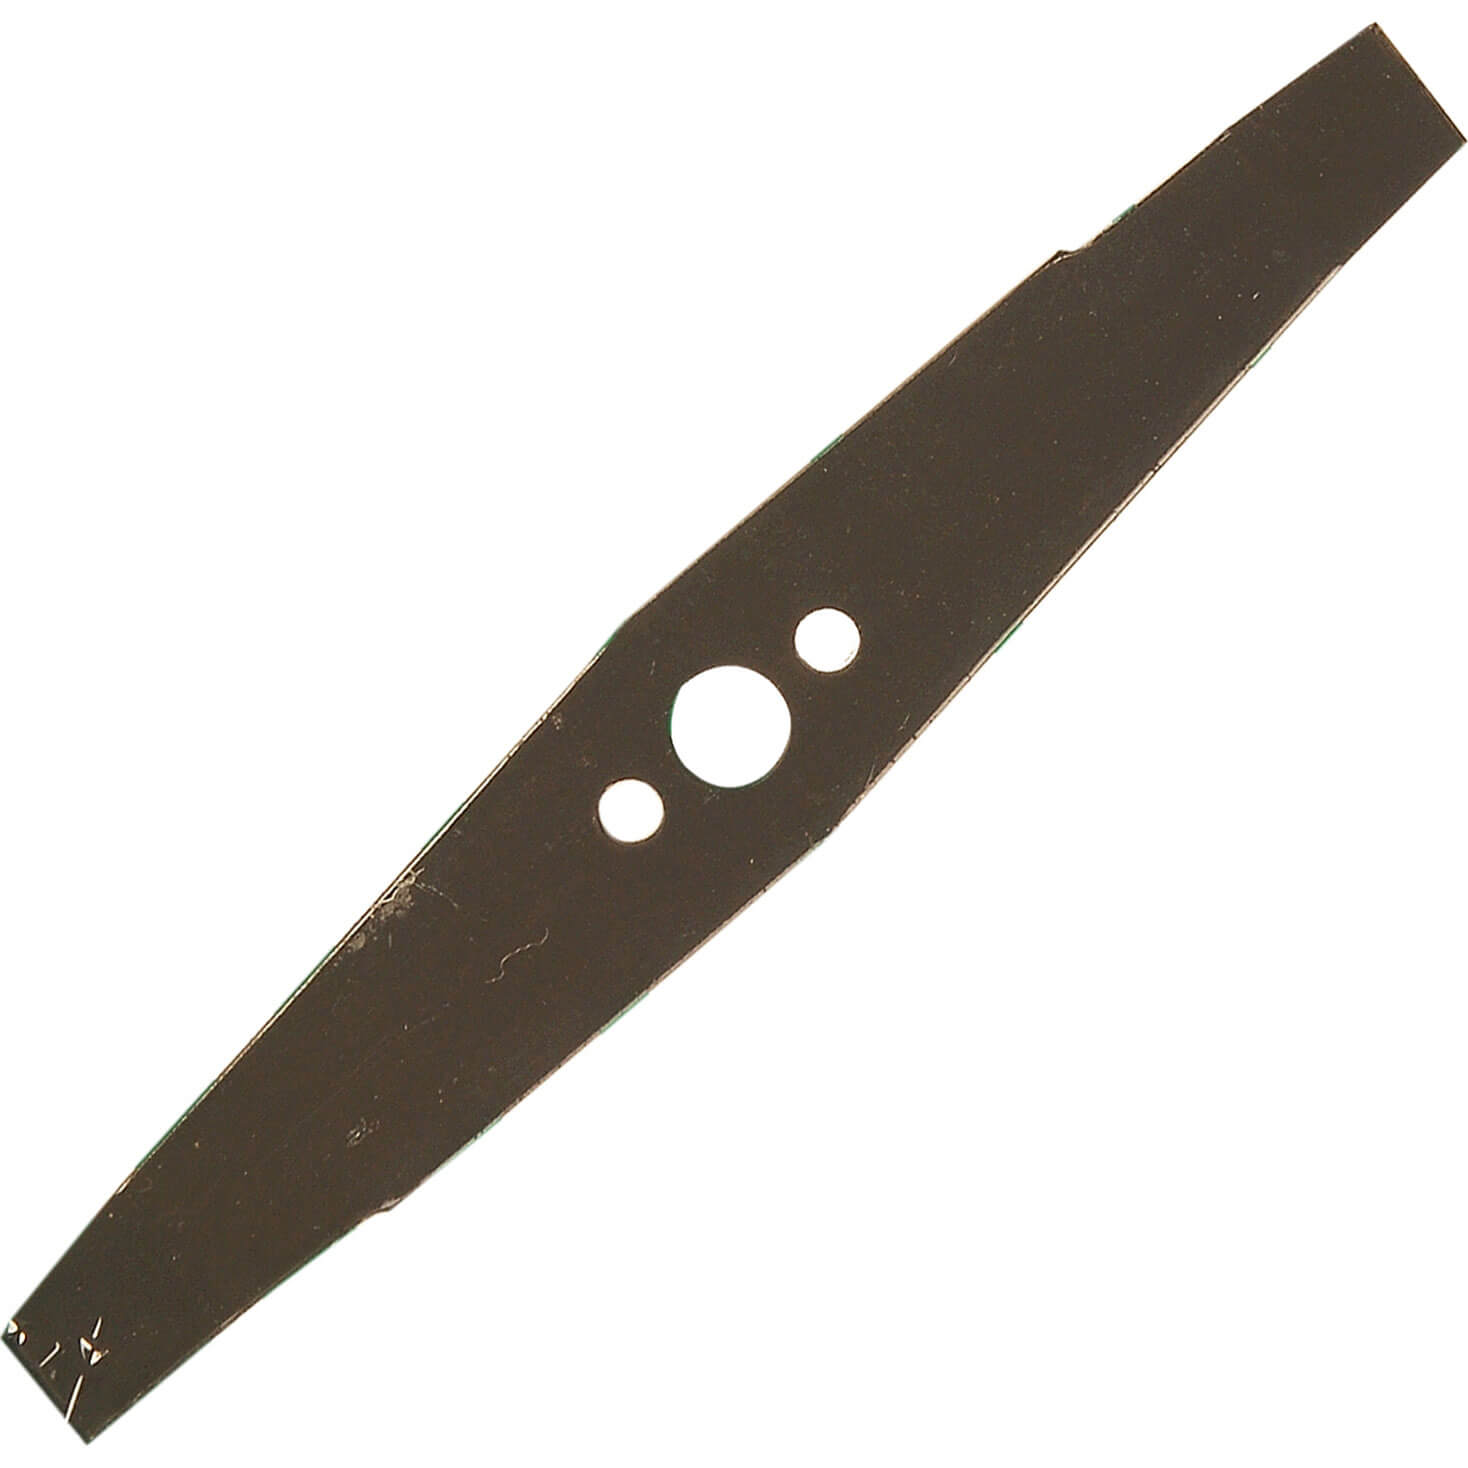 Photos - Lawn Mower Accessory ALM FL042 Metal Lawnmower Blade 10" Flymo FLY001 Pack of 1 